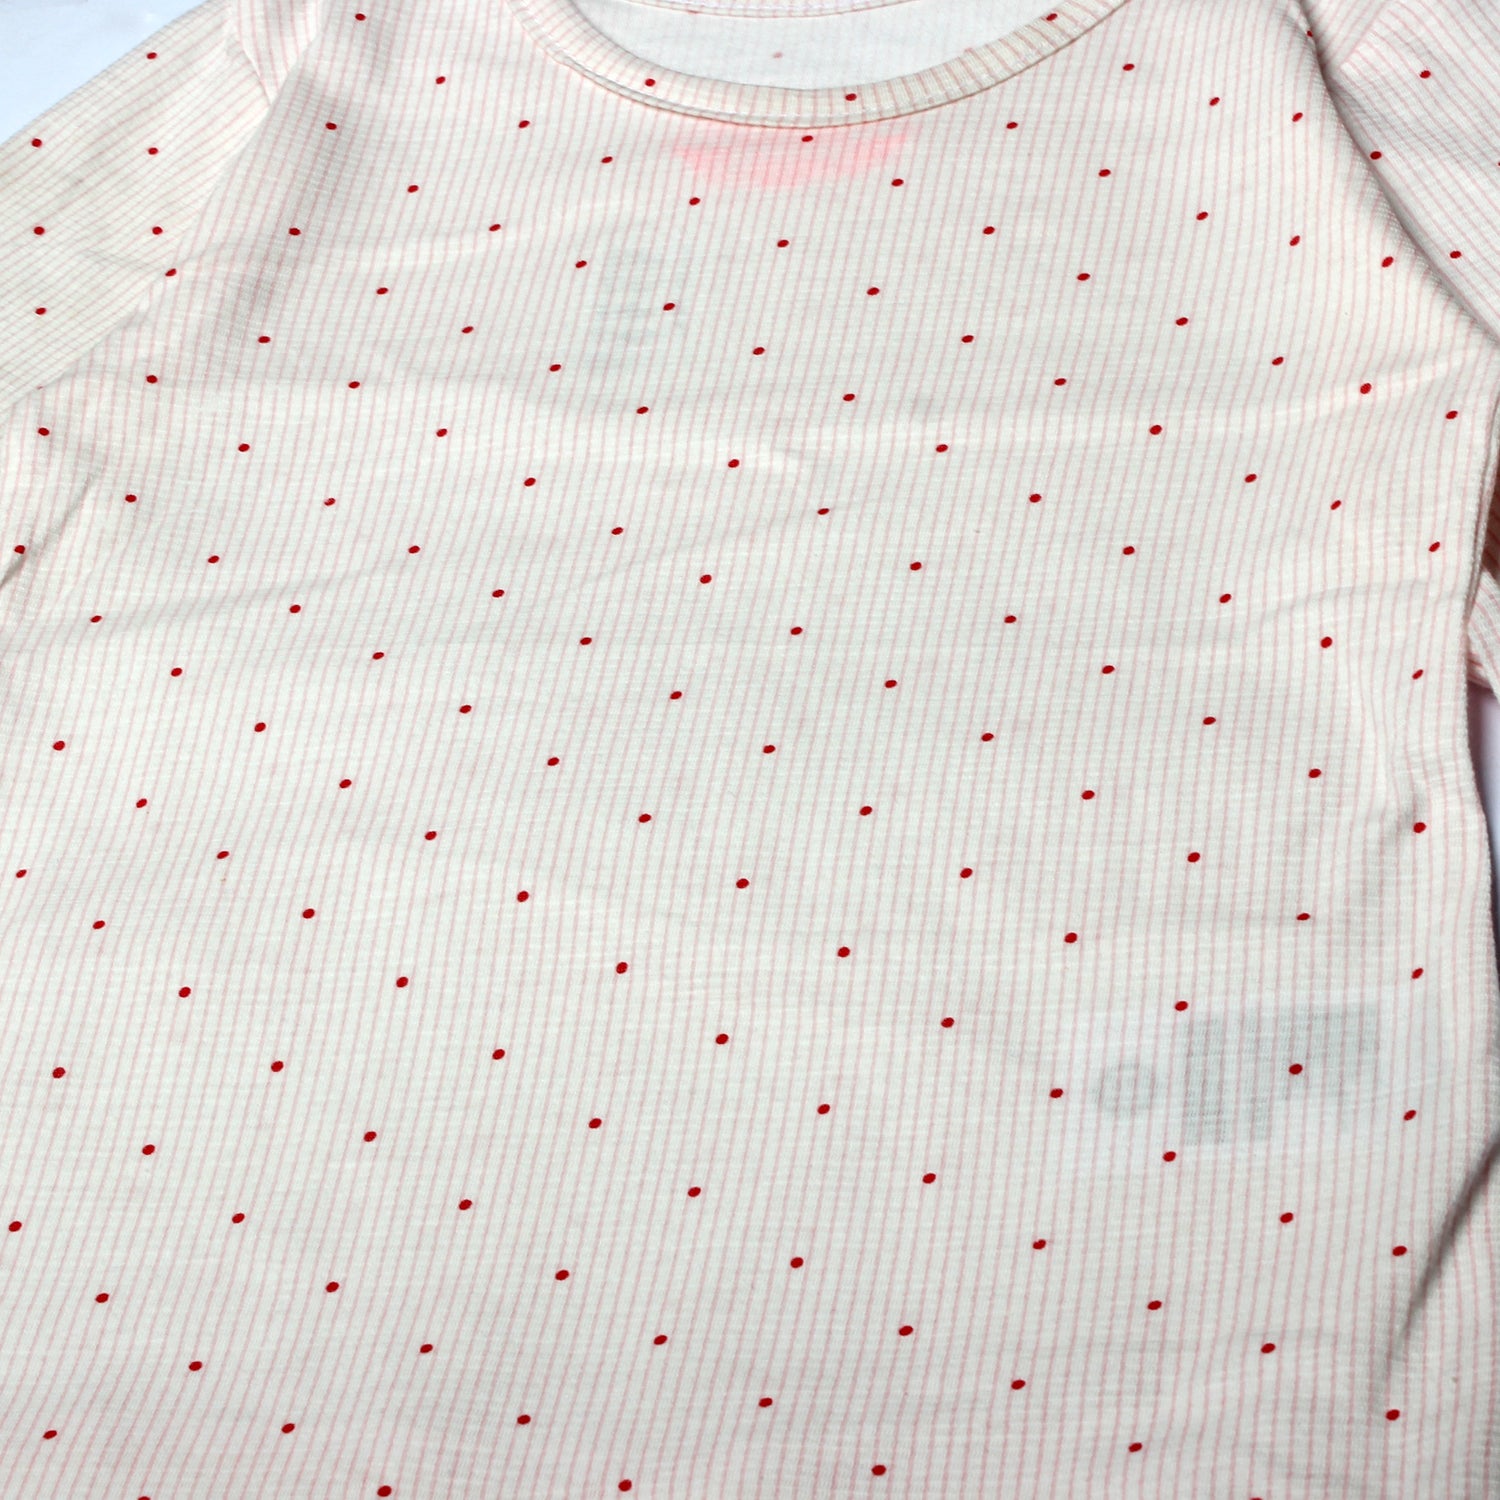 BABY PINK FULL SLEEVES POLKA DOTS PRINTED TOP FOR GIRLS